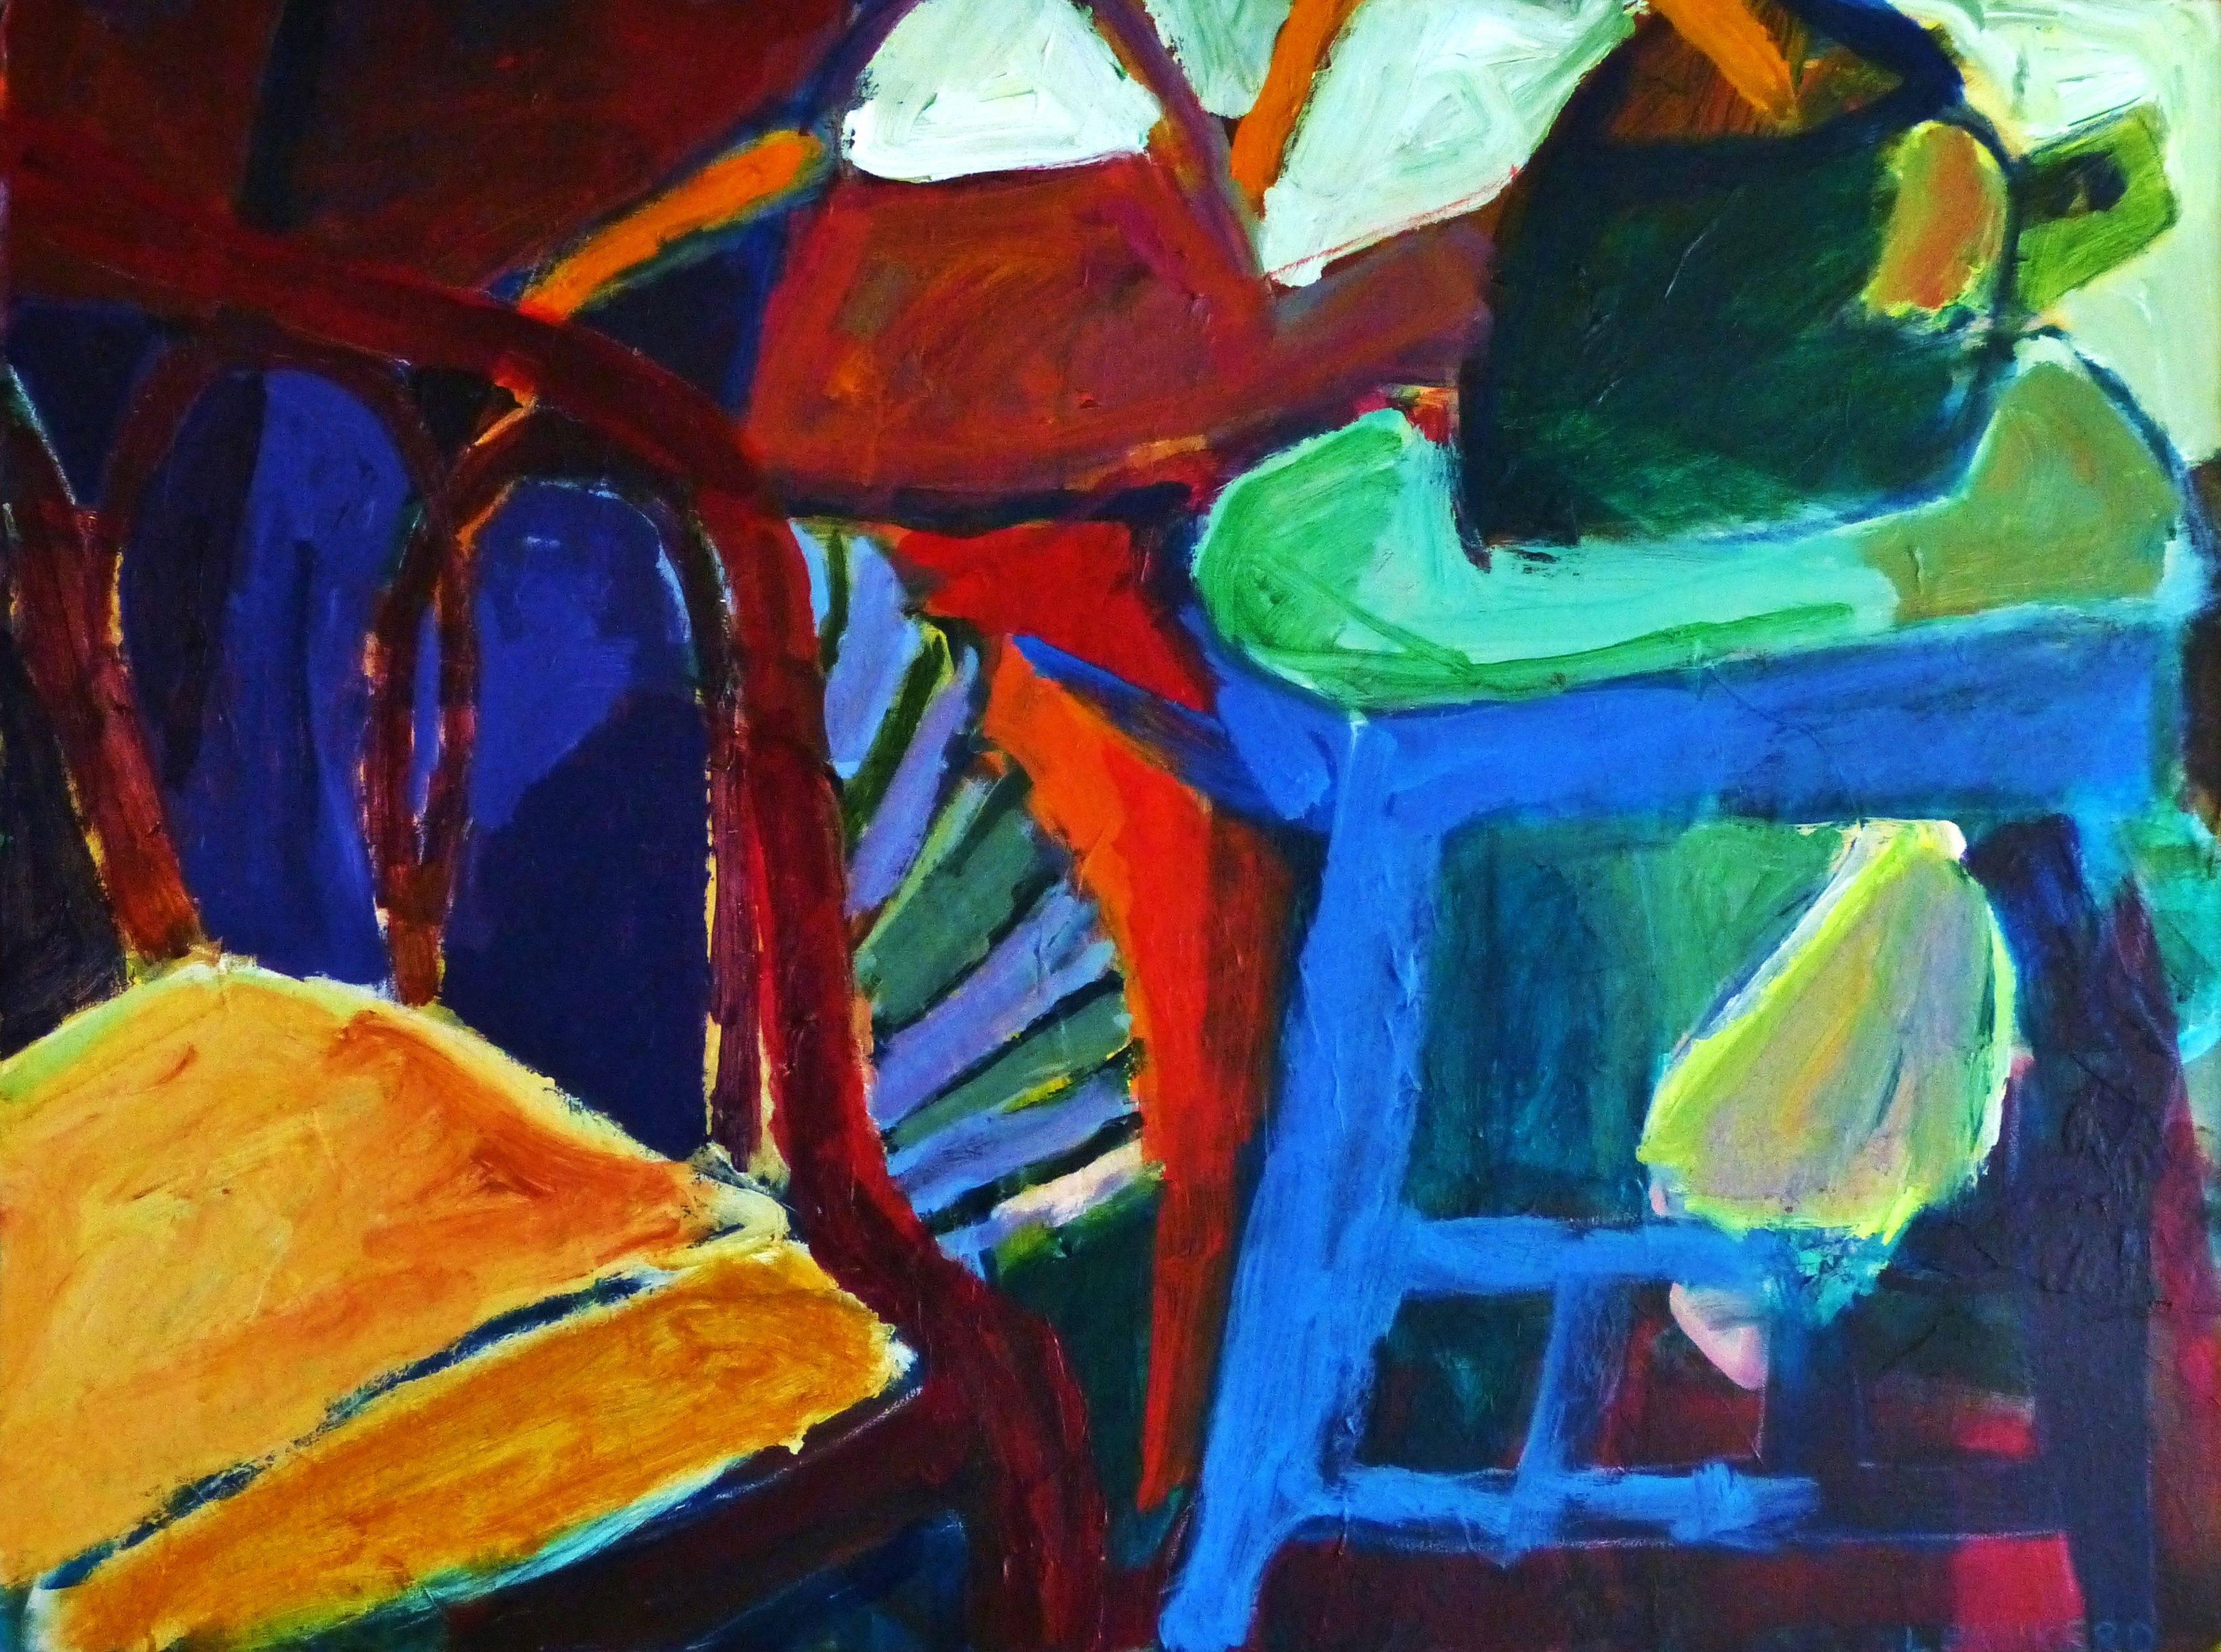 Bamboo chair with Tea Pots, Acrylic Painting on Canvas